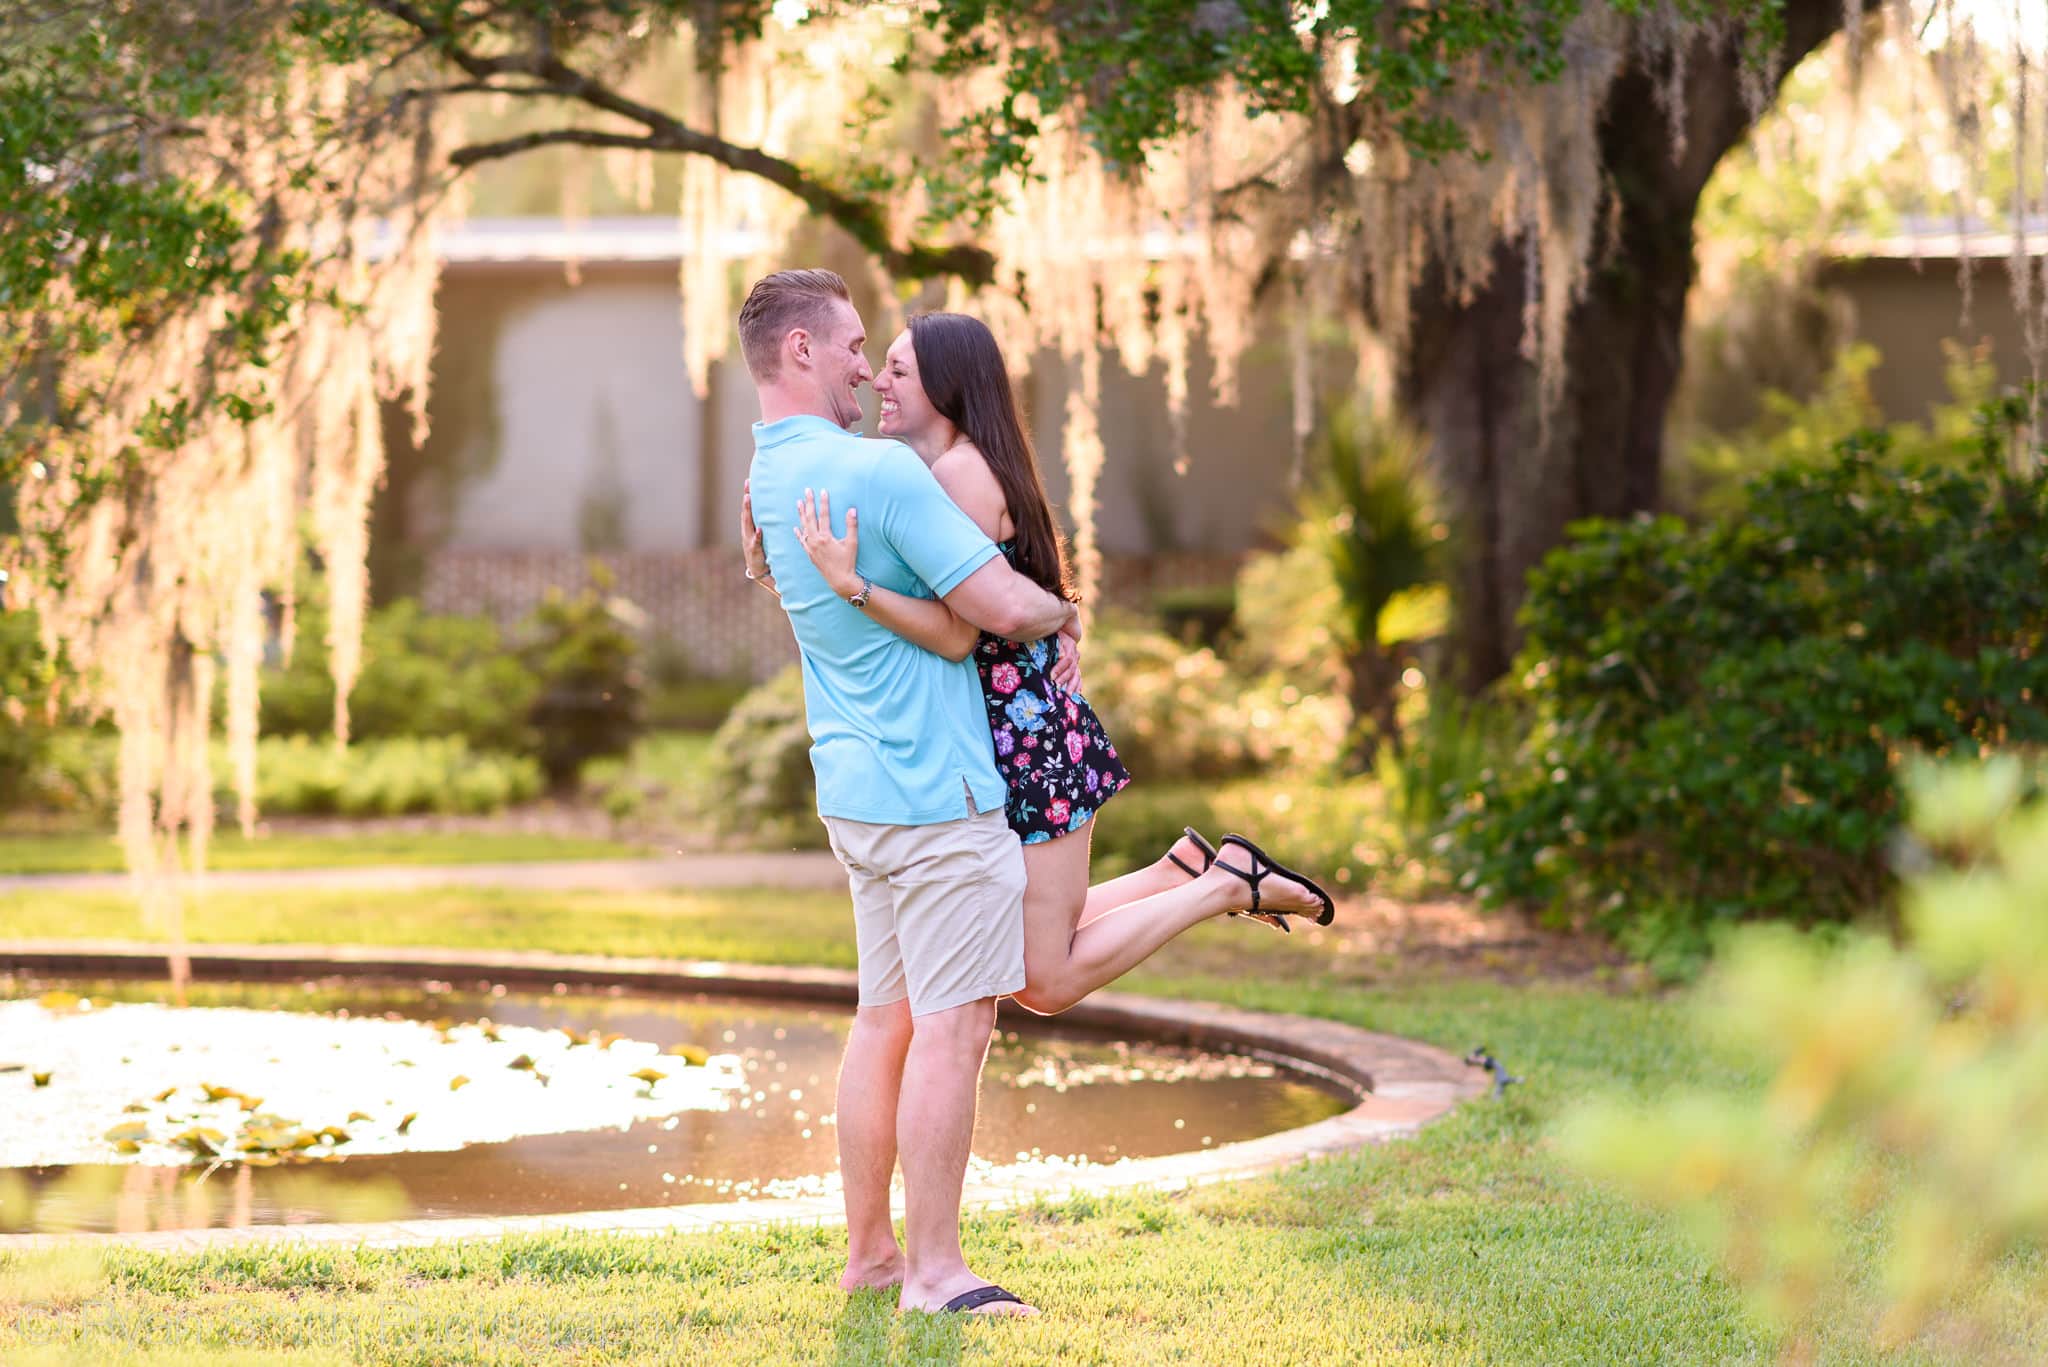 Lifting fiancé in the air for a kiss - Brookgreen Gardens